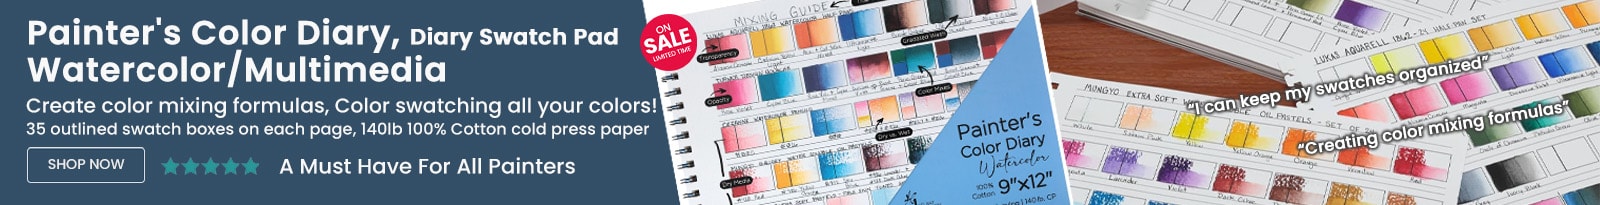 Watercolor & Multimedia Color Diary Pad, 10 Pages, 9x12